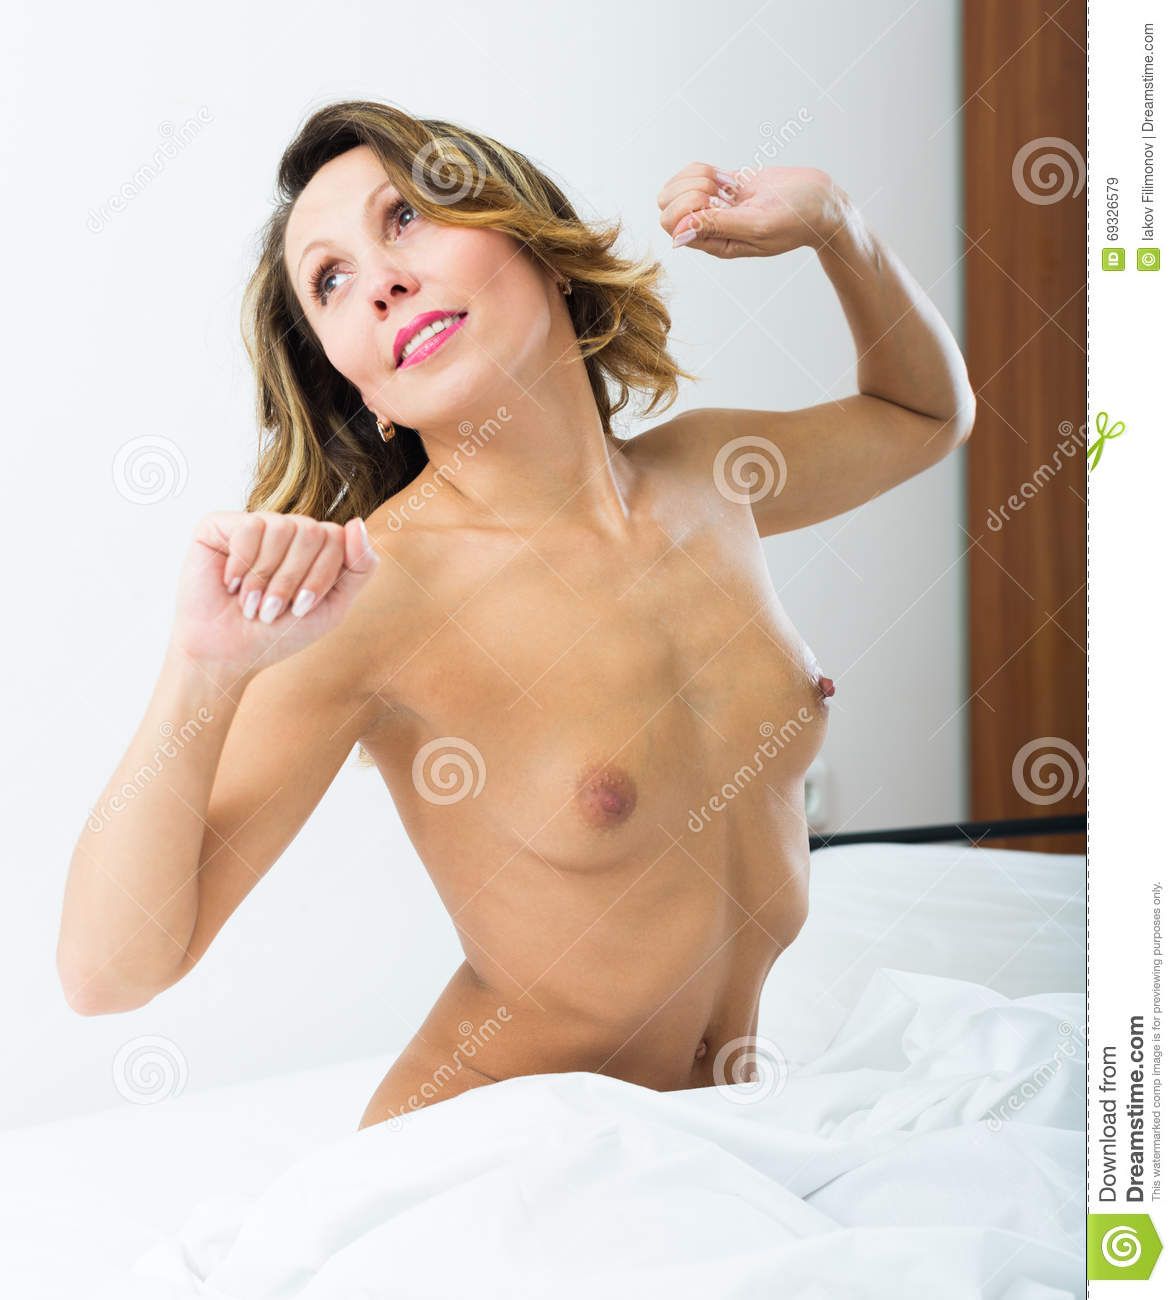 Topless middle aged women